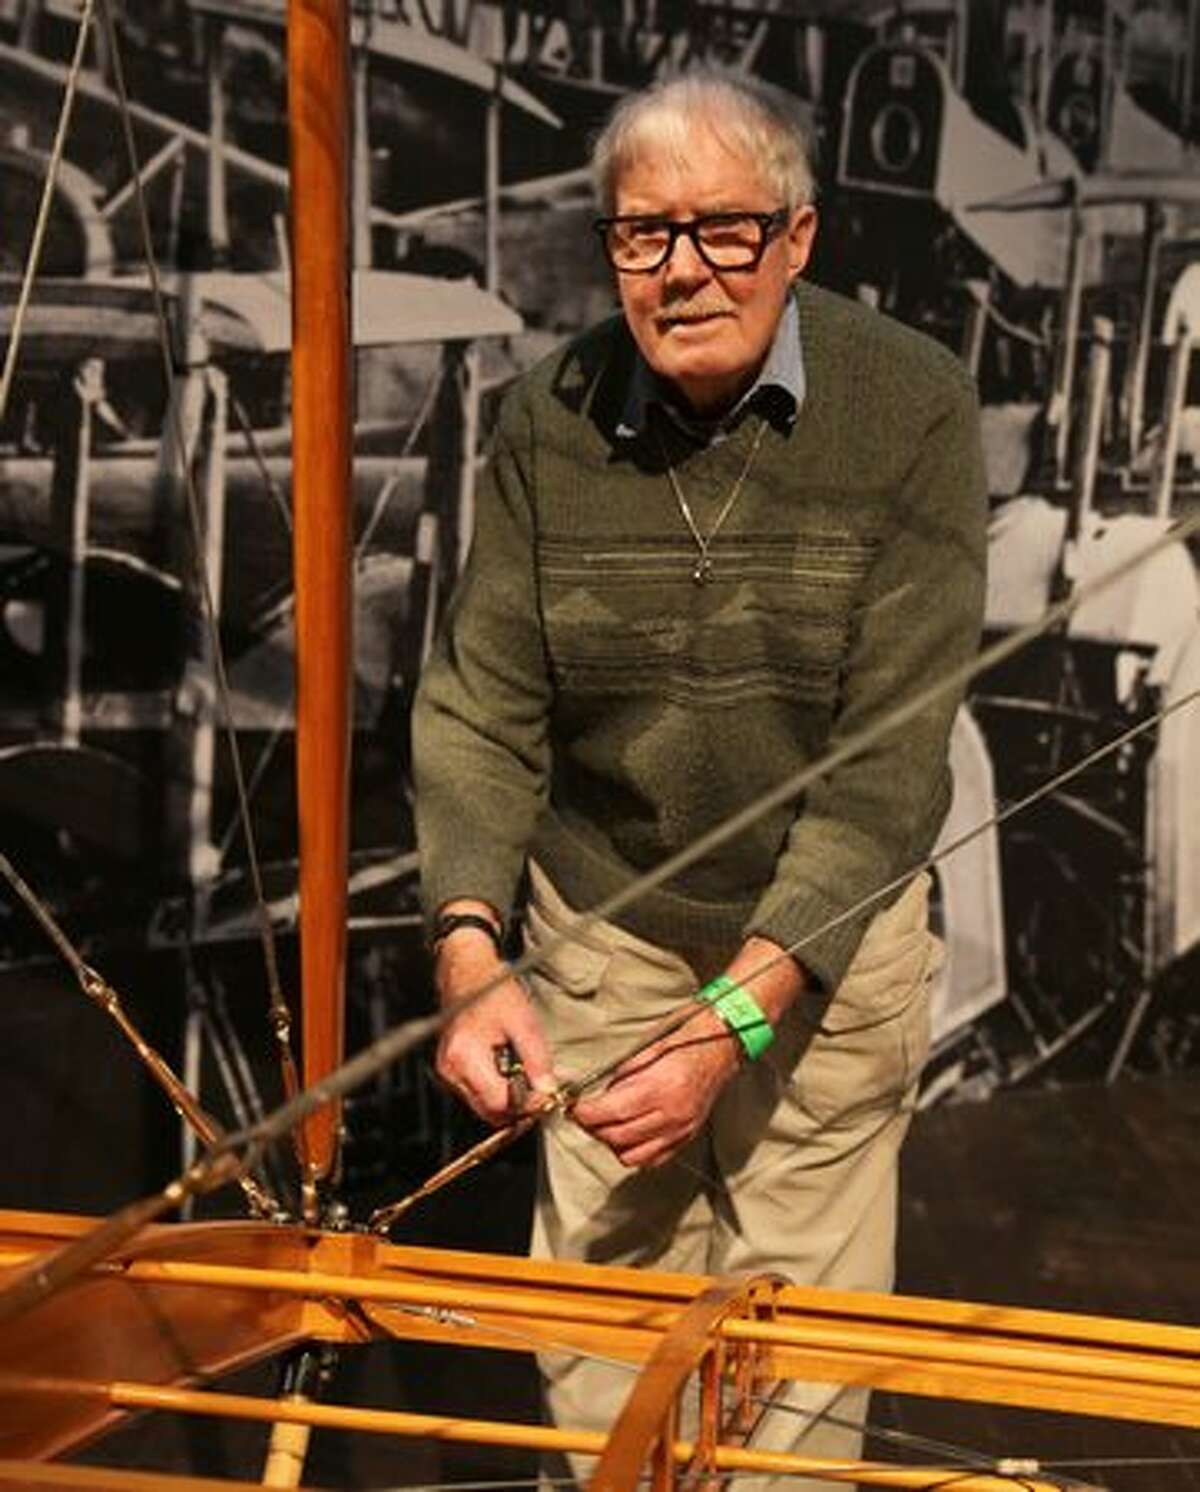 Leonard King works on the Seattle Museum of Flight's Curtiss JN-4D Jenny. King was part of the team that originally restored the Jenny in the early 1980s.